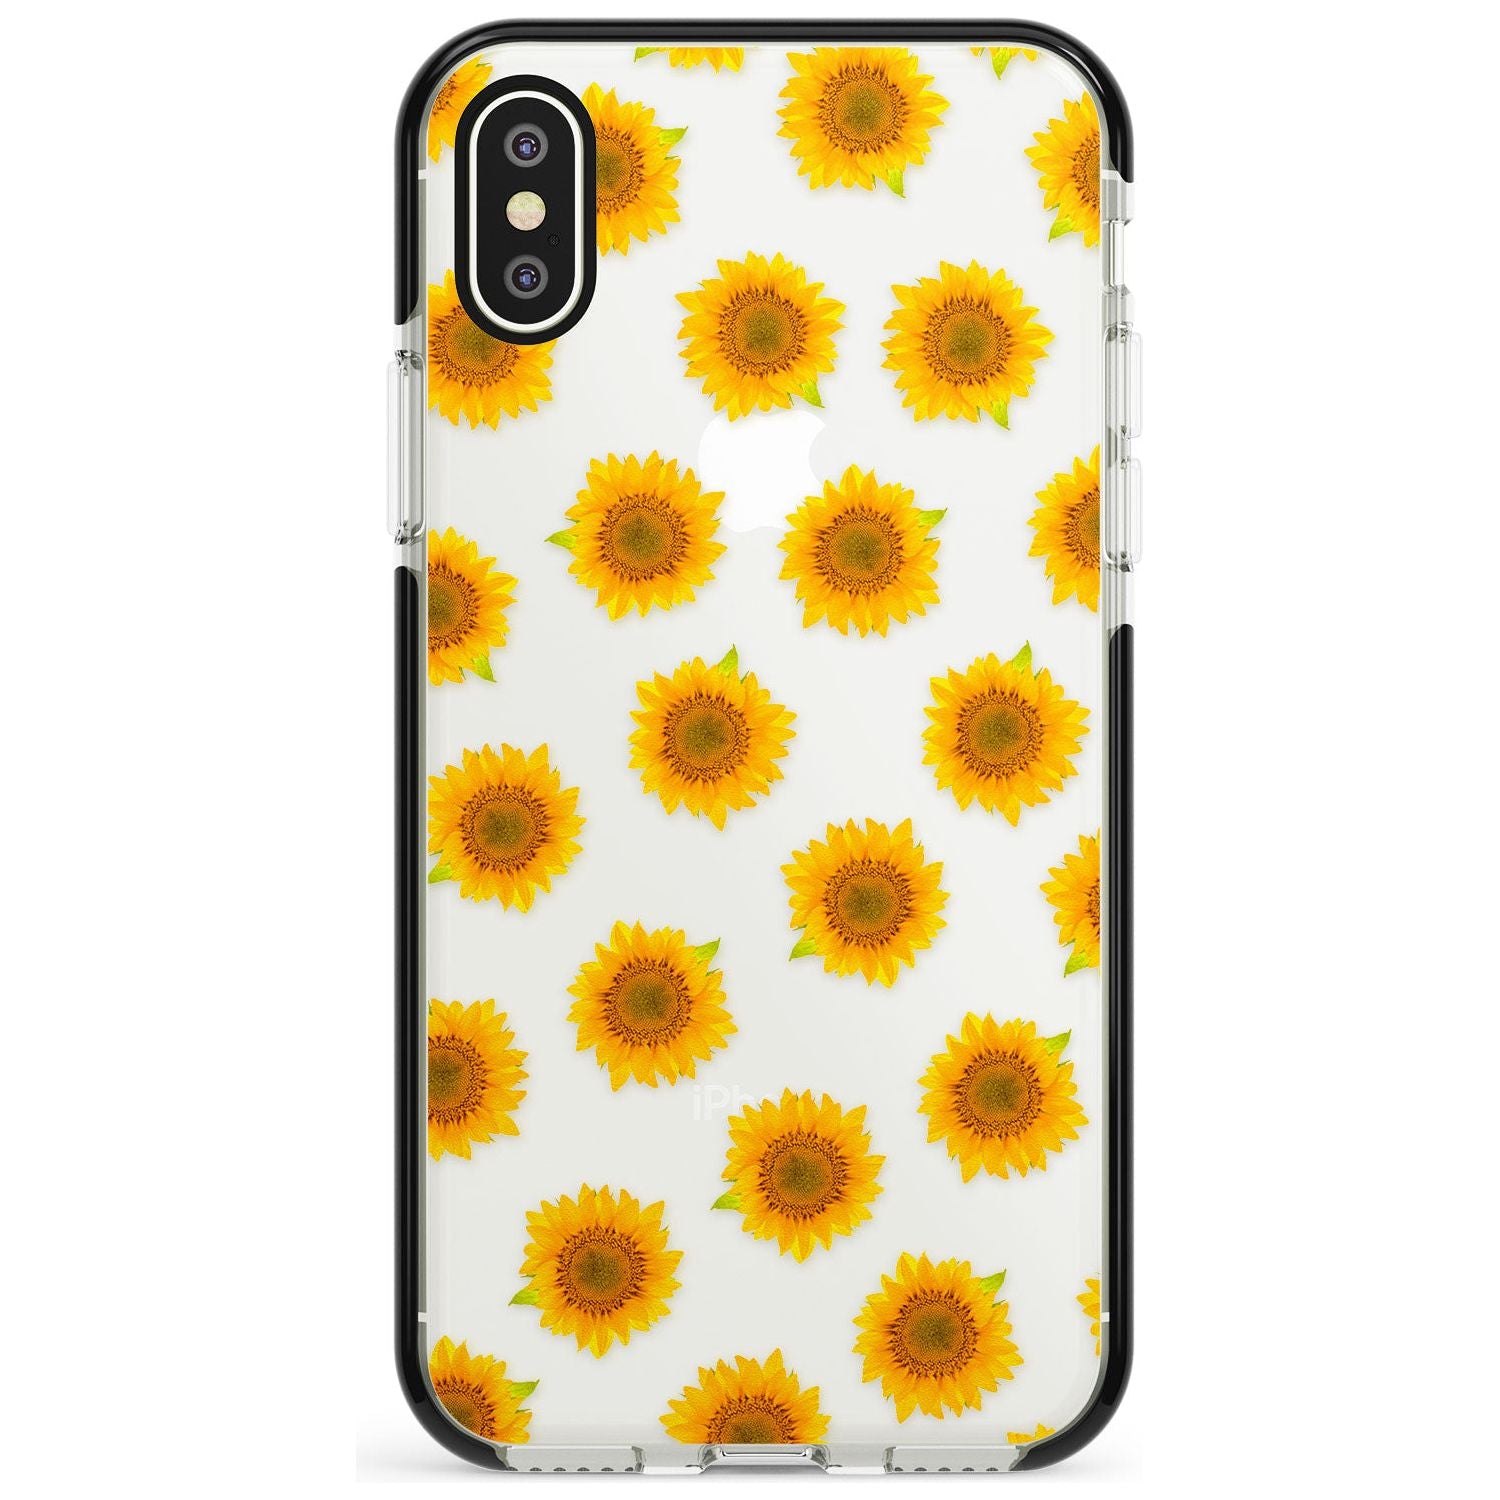 Sunflowers Transparent Pattern Black Impact Phone Case for iPhone X XS Max XR